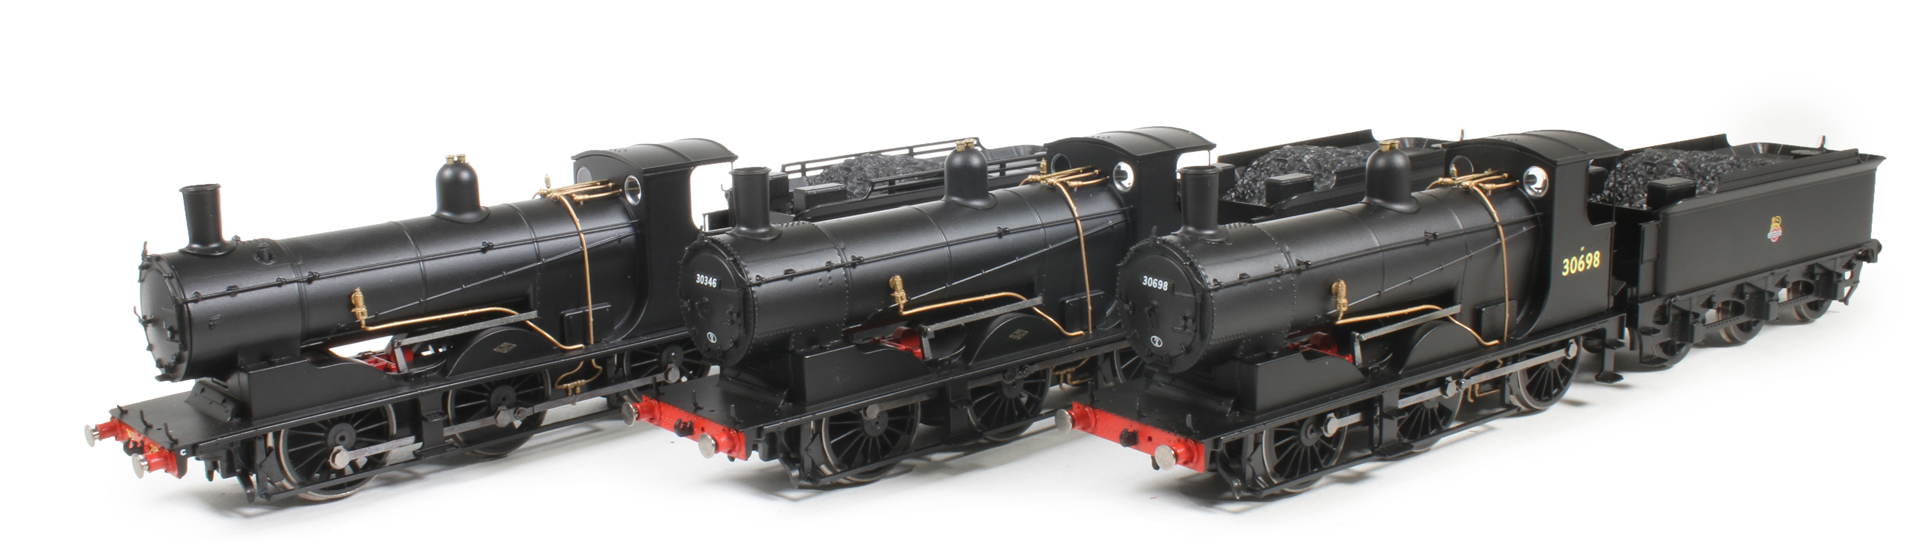 Hornby OO Gauge (1:76 Scale) 0-6-0 Class 700 LSWR